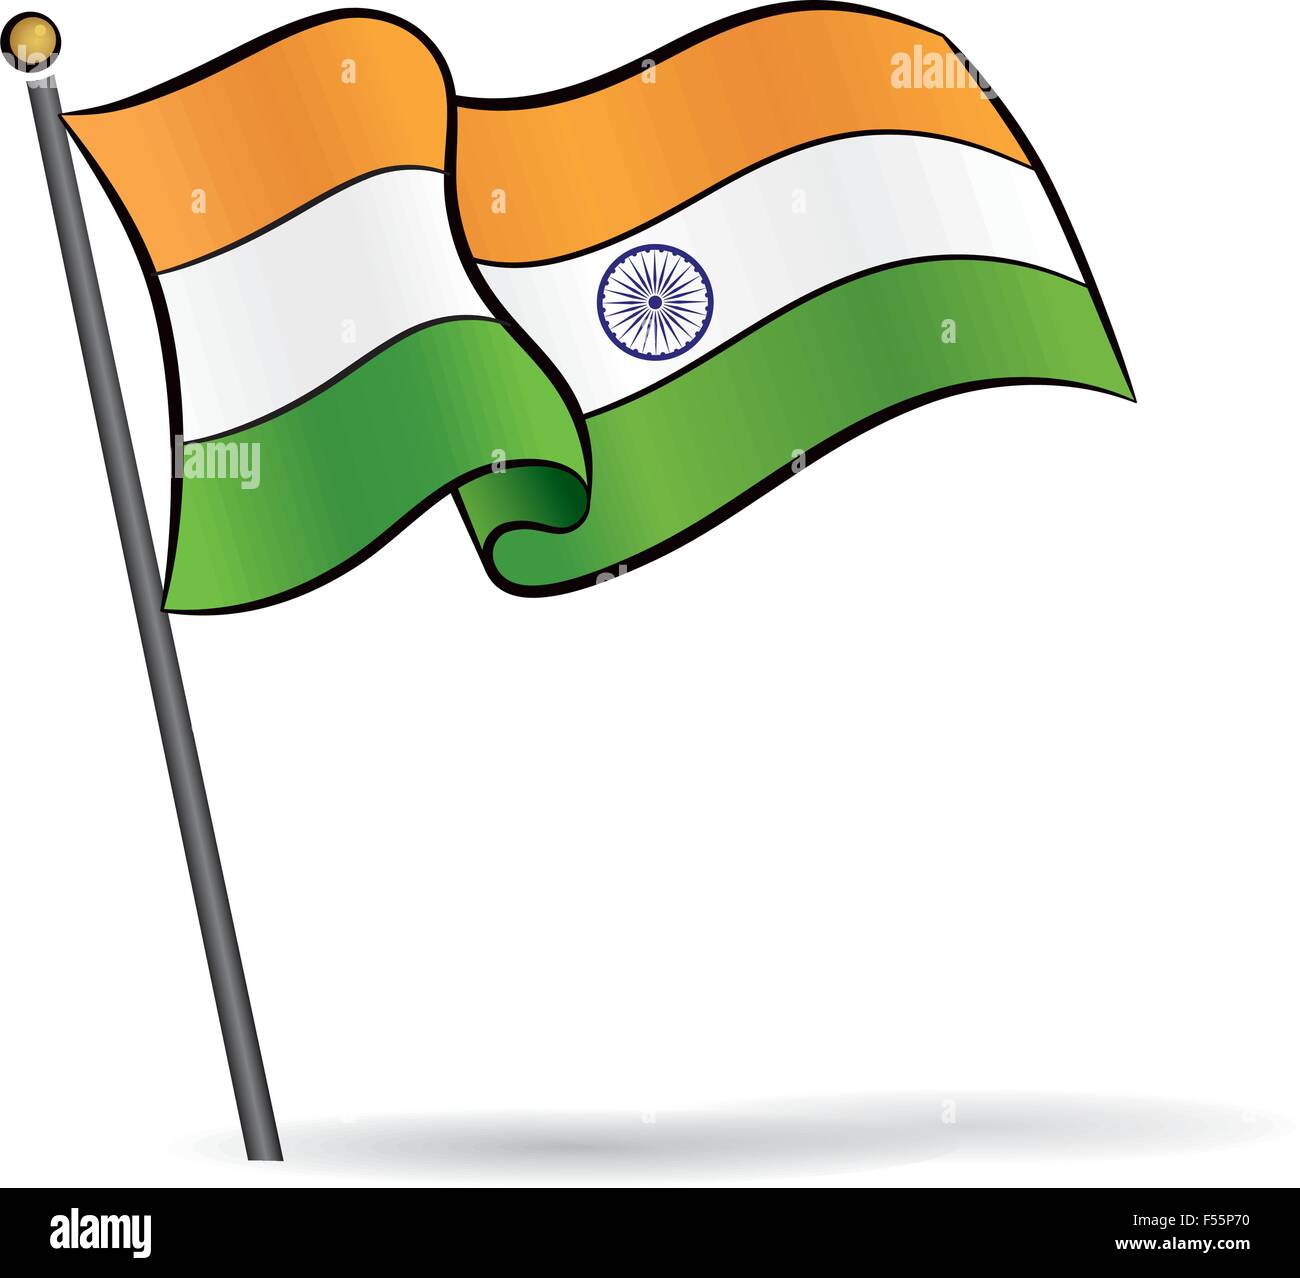 Create Indian Flag drawing in Ms word using shapes : r/freetechnicalupdates-saigonsouth.com.vn